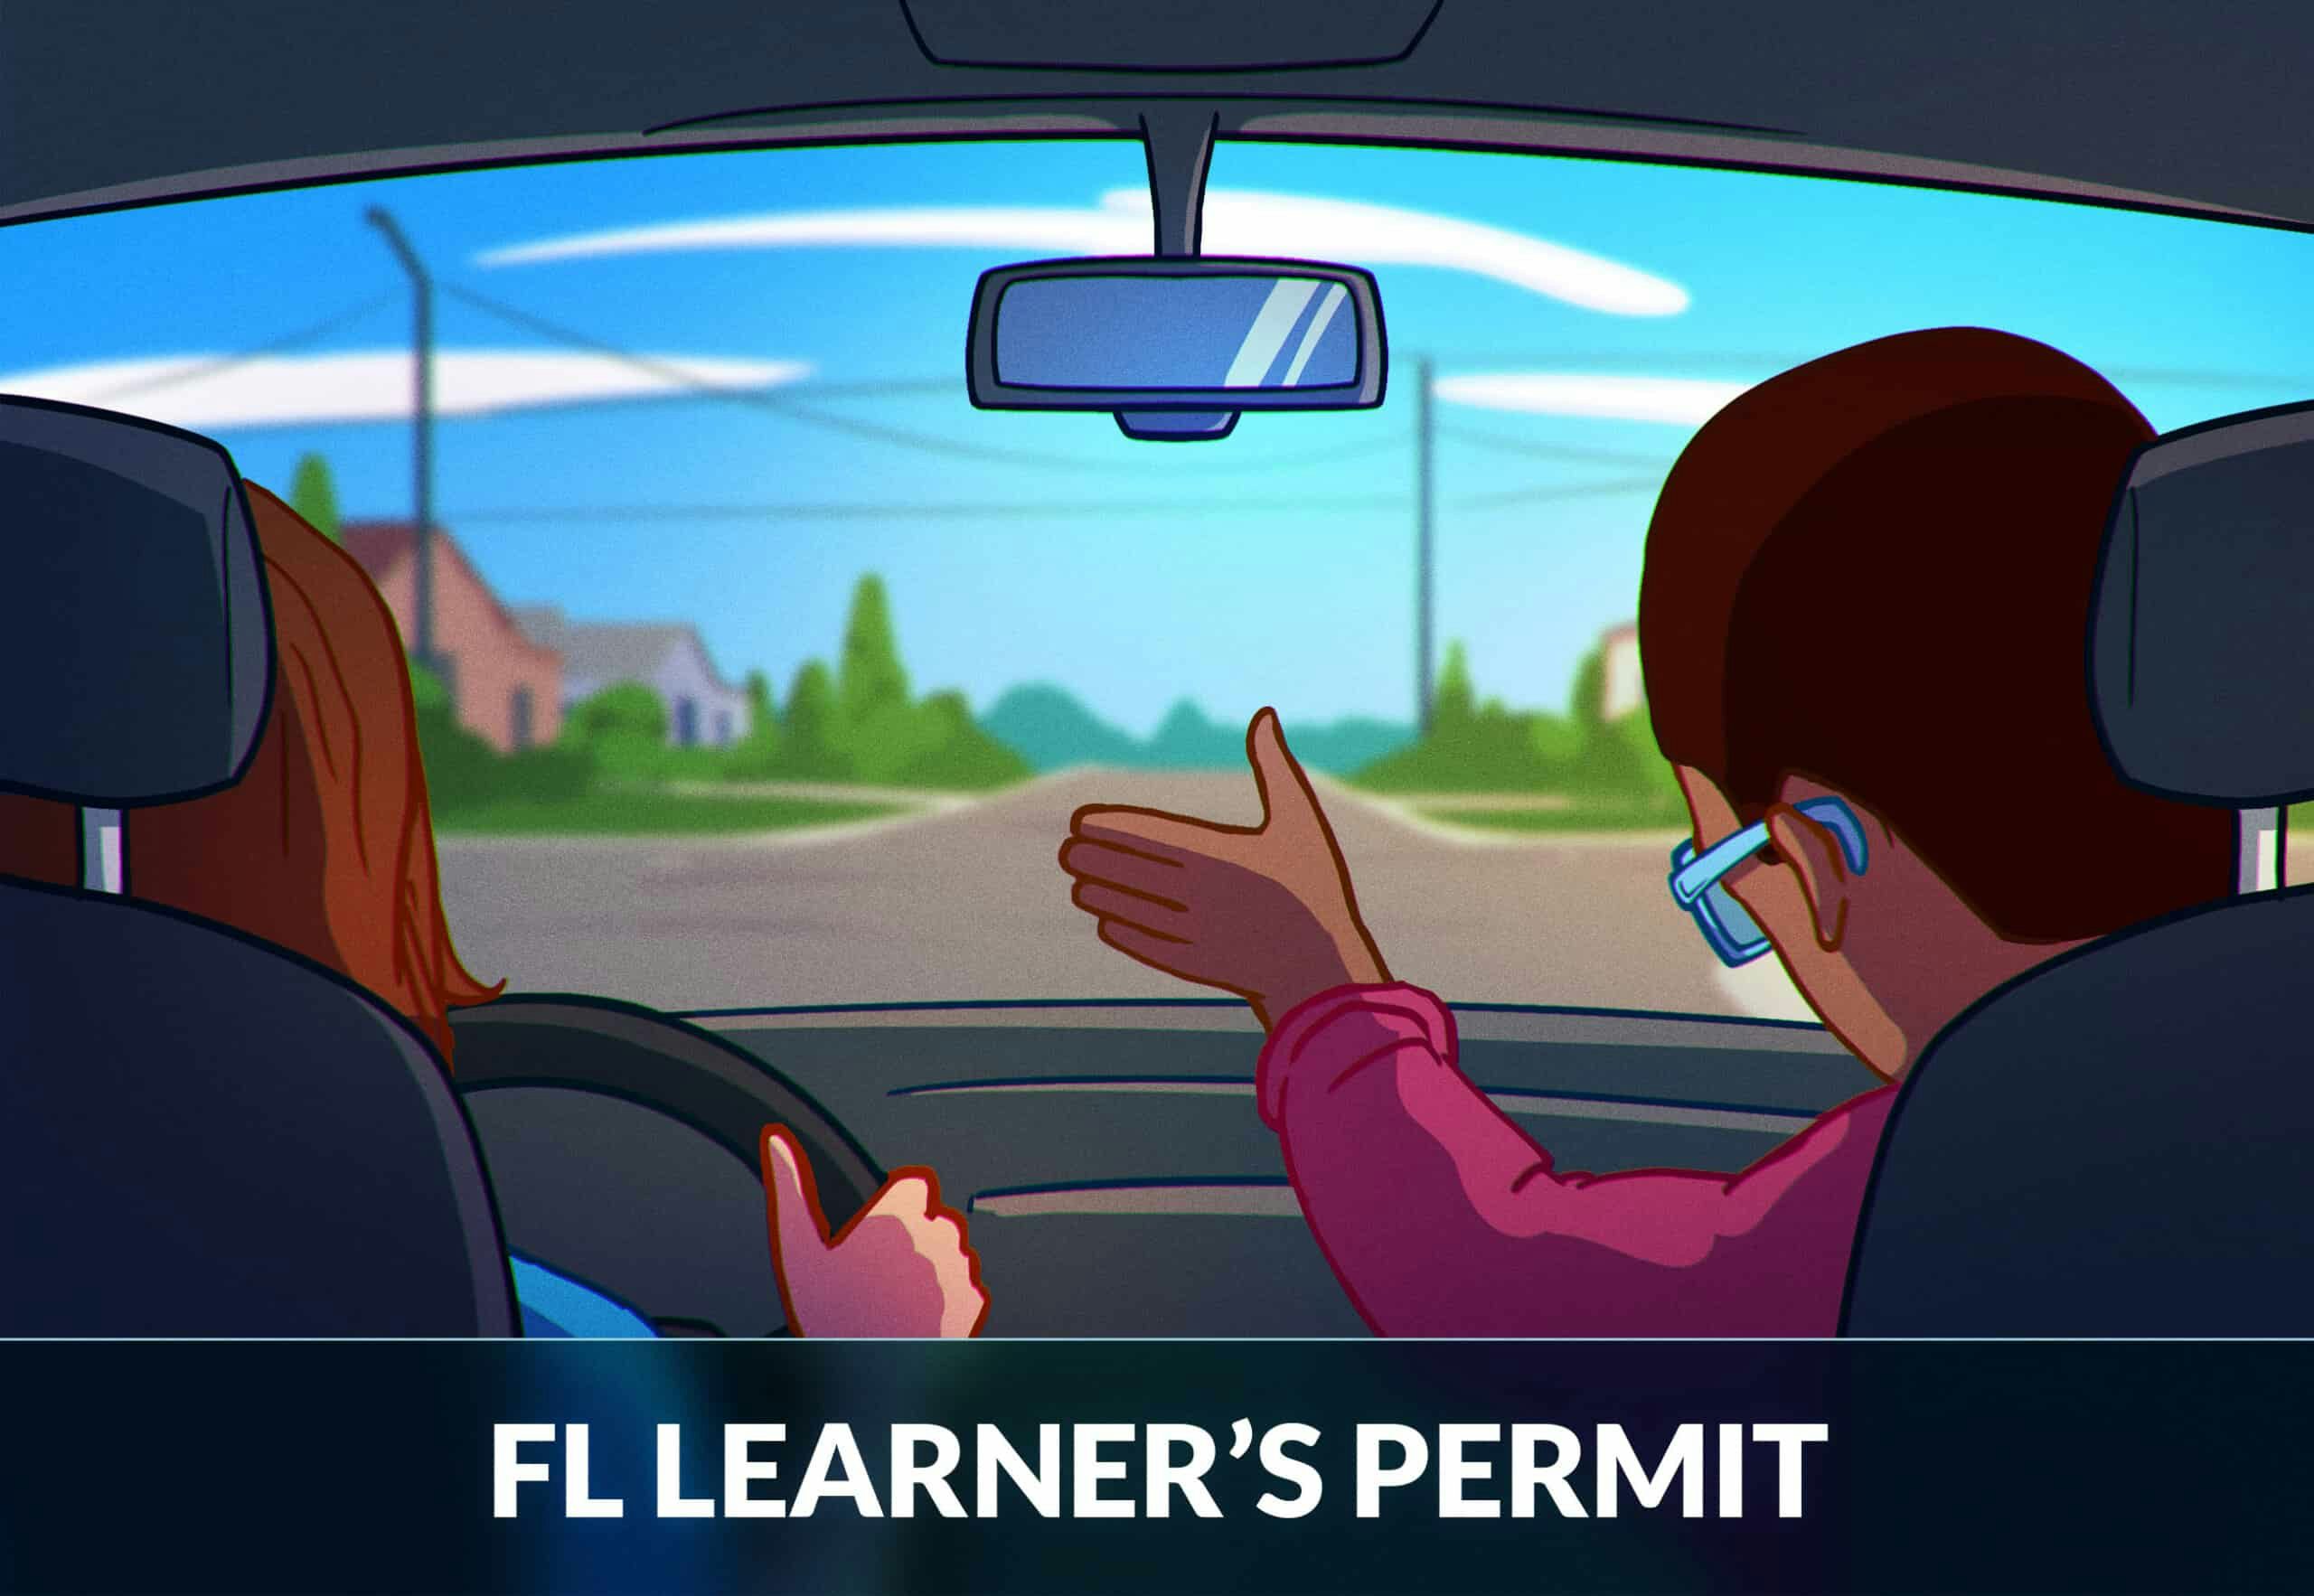 Getting a Florida Learner's Permit Rules and Requirements